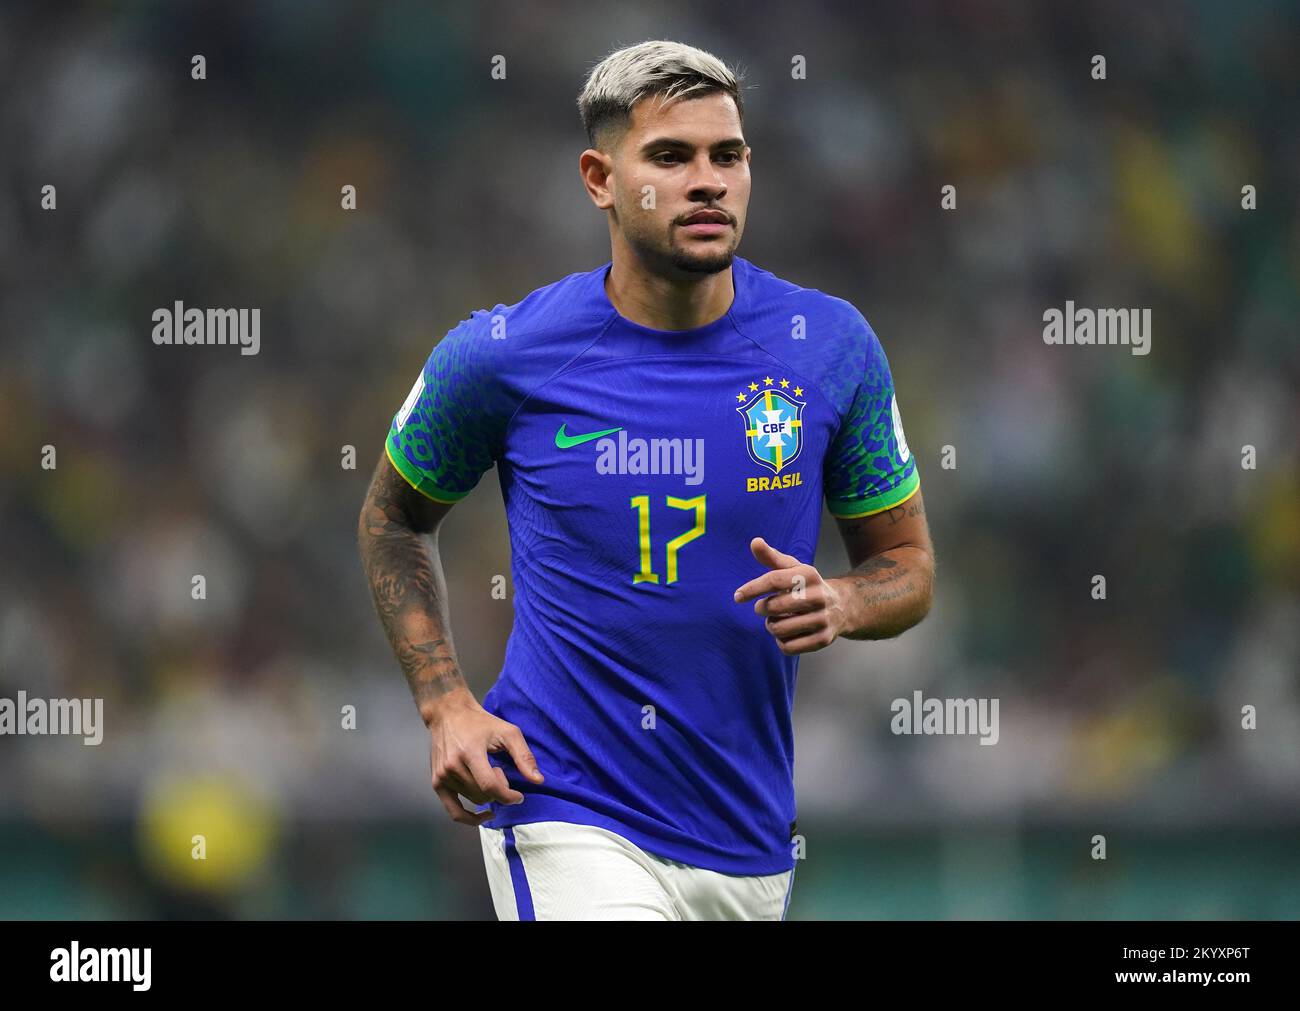 https://c8.alamy.com/comp/2KYXP6T/brazils-bruno-guimaraes-during-the-fifa-world-cup-group-g-match-at-the-lusail-stadium-in-lusail-qatar-picture-date-friday-december-2-2022-2KYXP6T.jpg